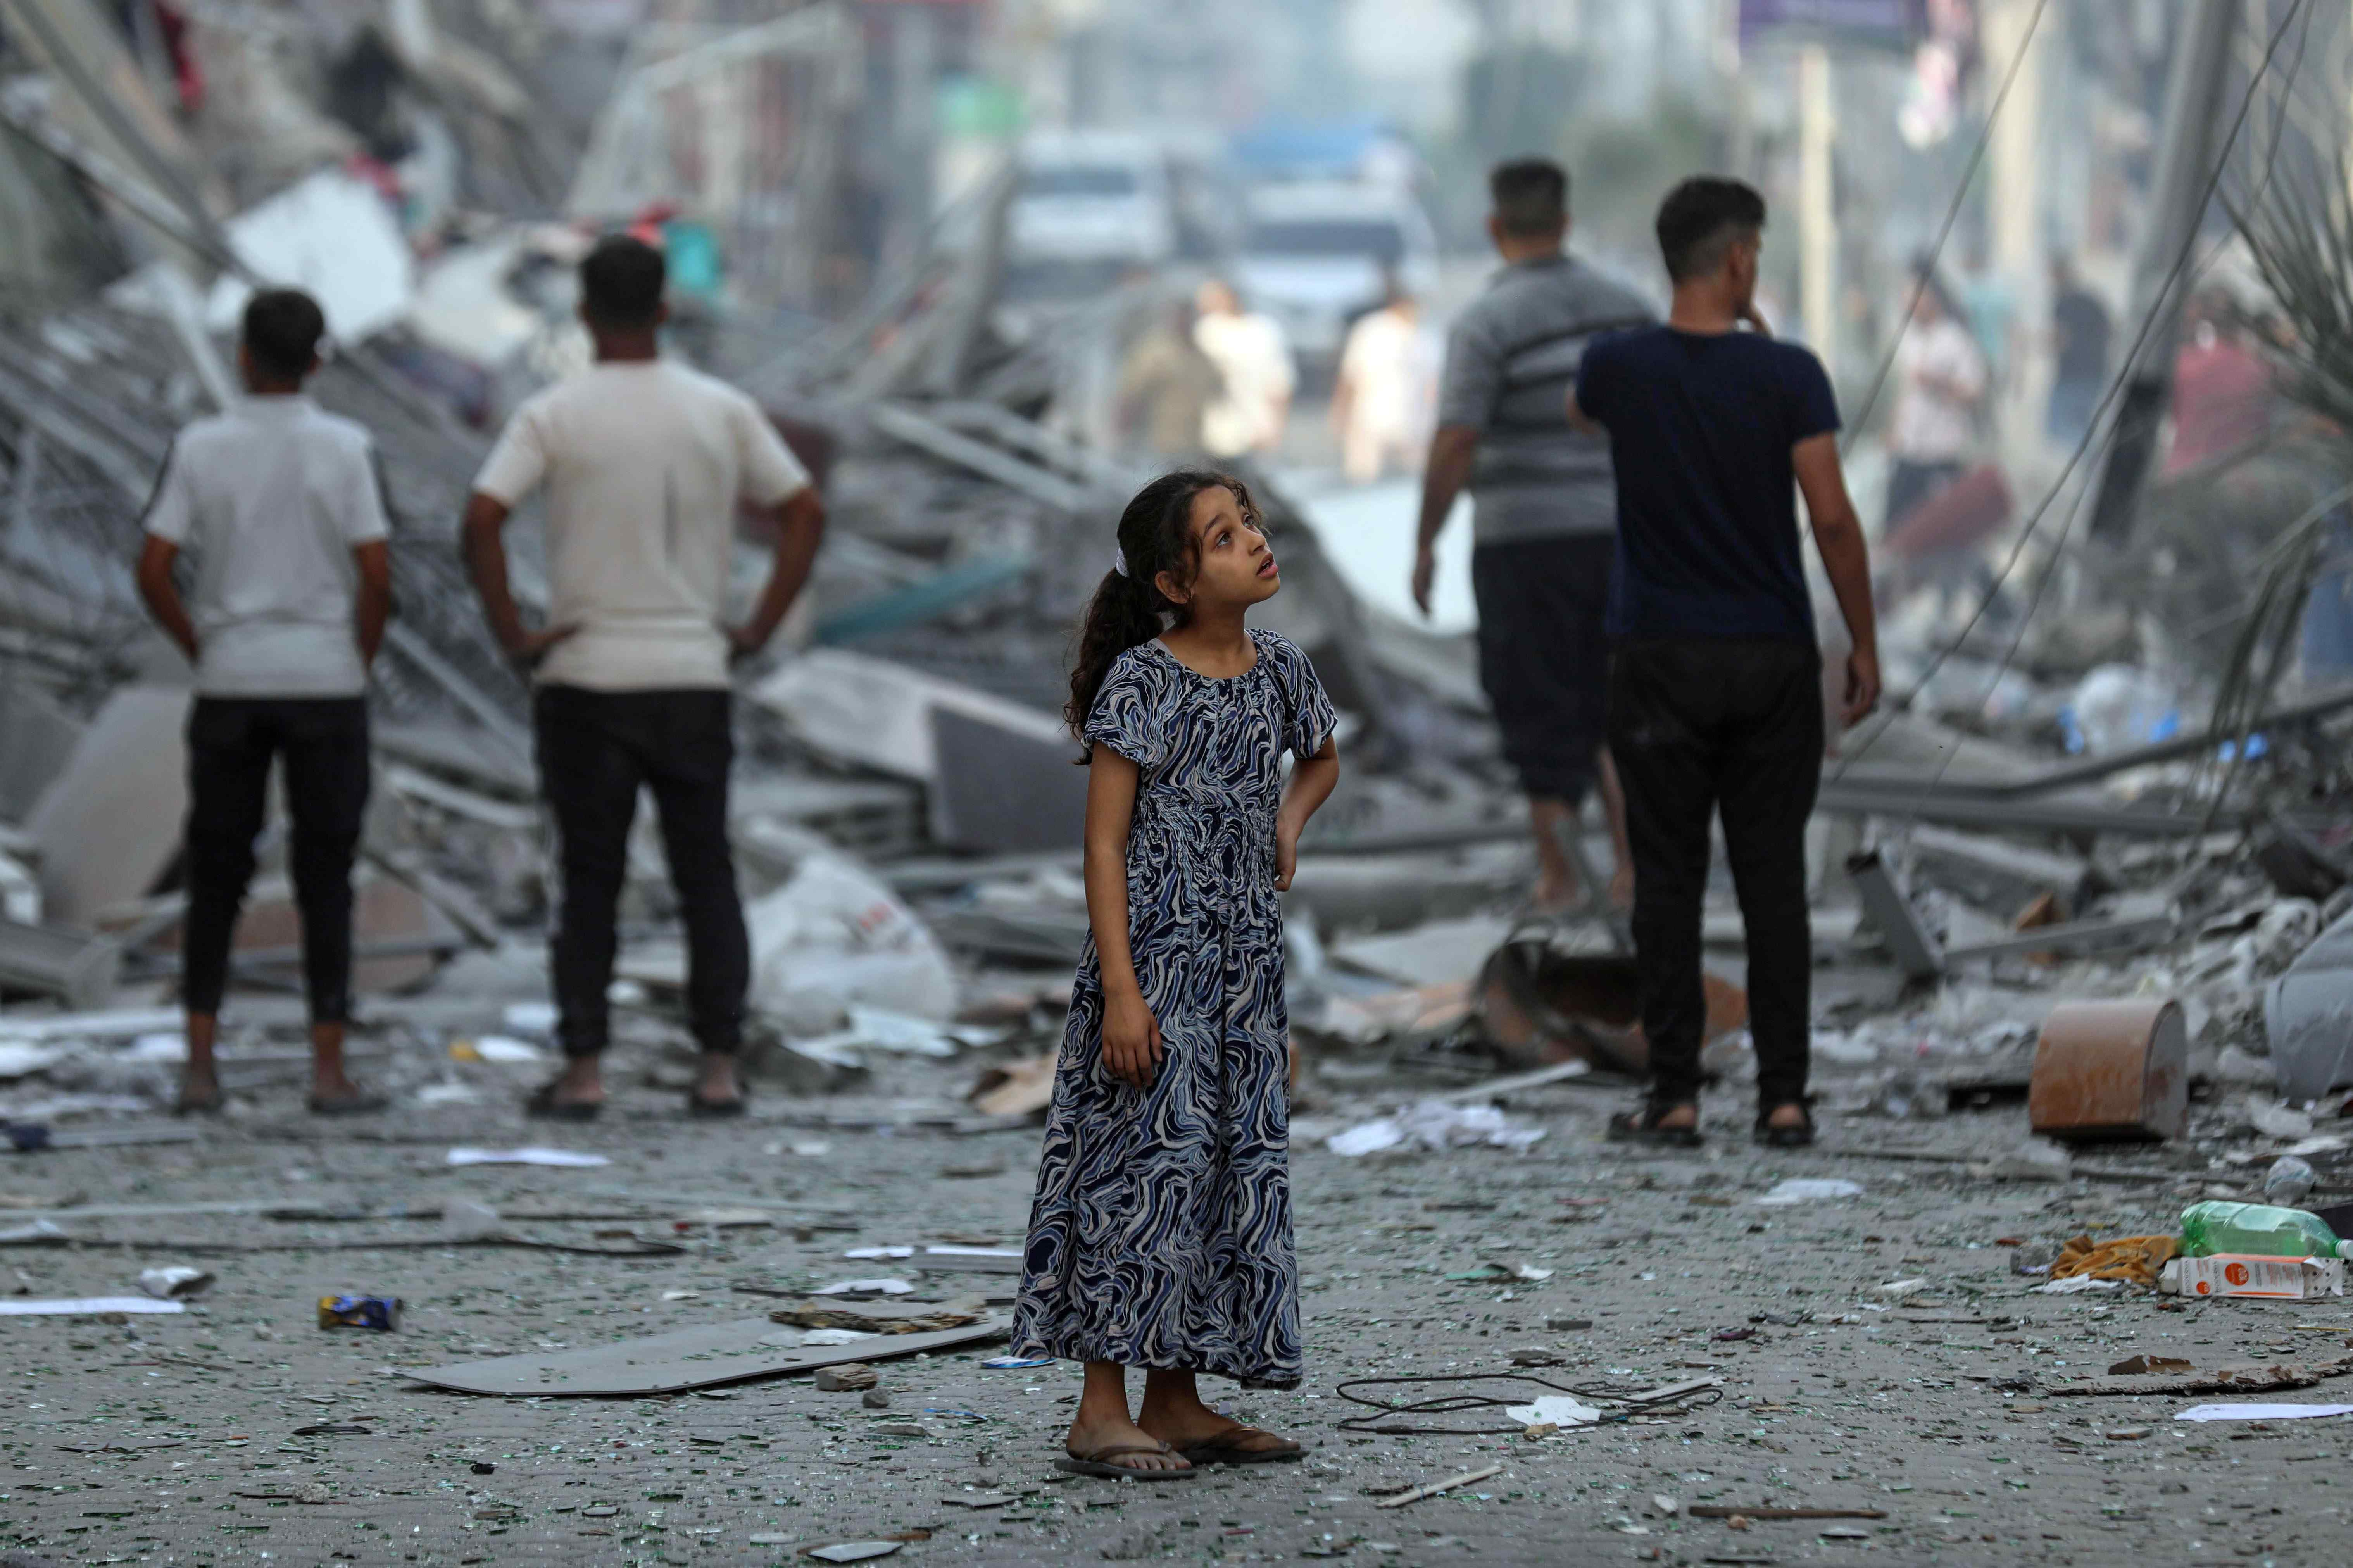 A young girl stands in the middle of a street covered in debris in Gaza.